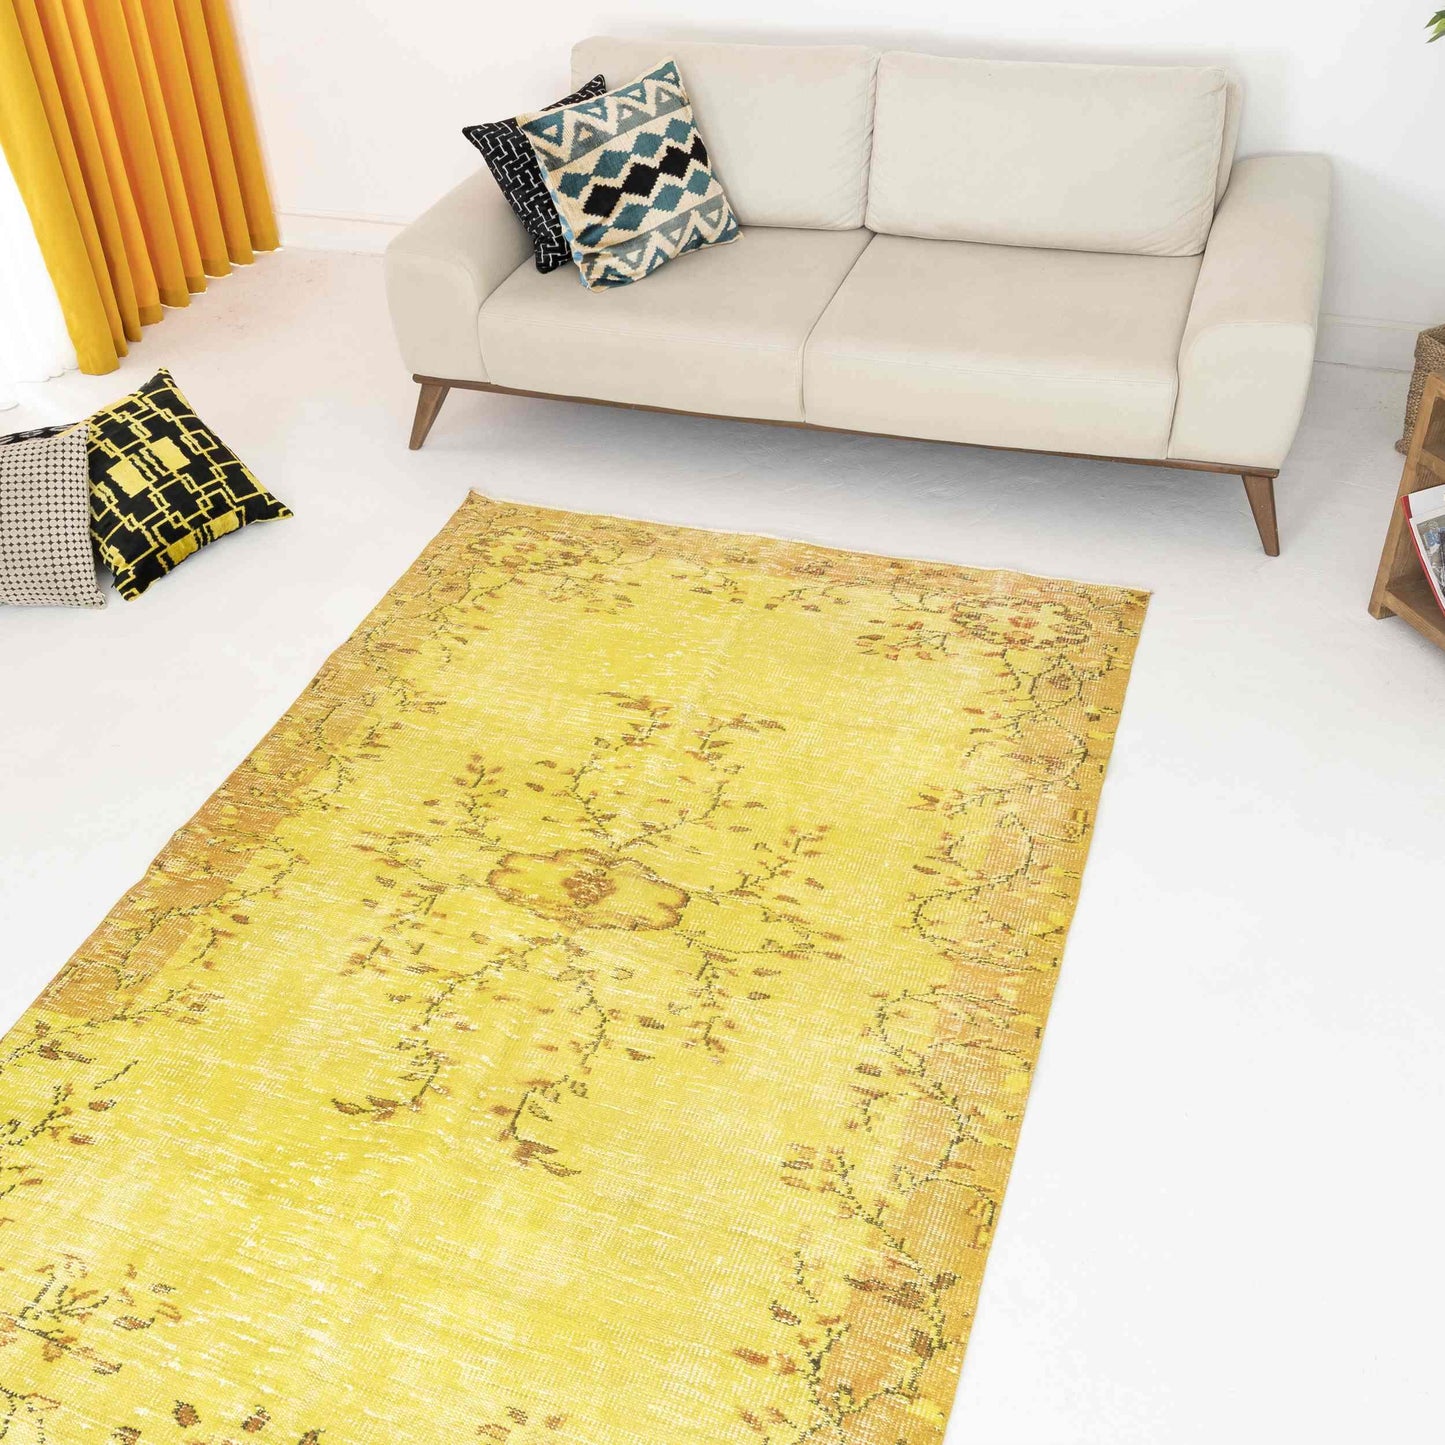 Oriental Rug Vintage Hand Knotted Wool On Cotton 157 x 255 Cm - 5' 2'' x 8' 5'' Yellow C006 ER12